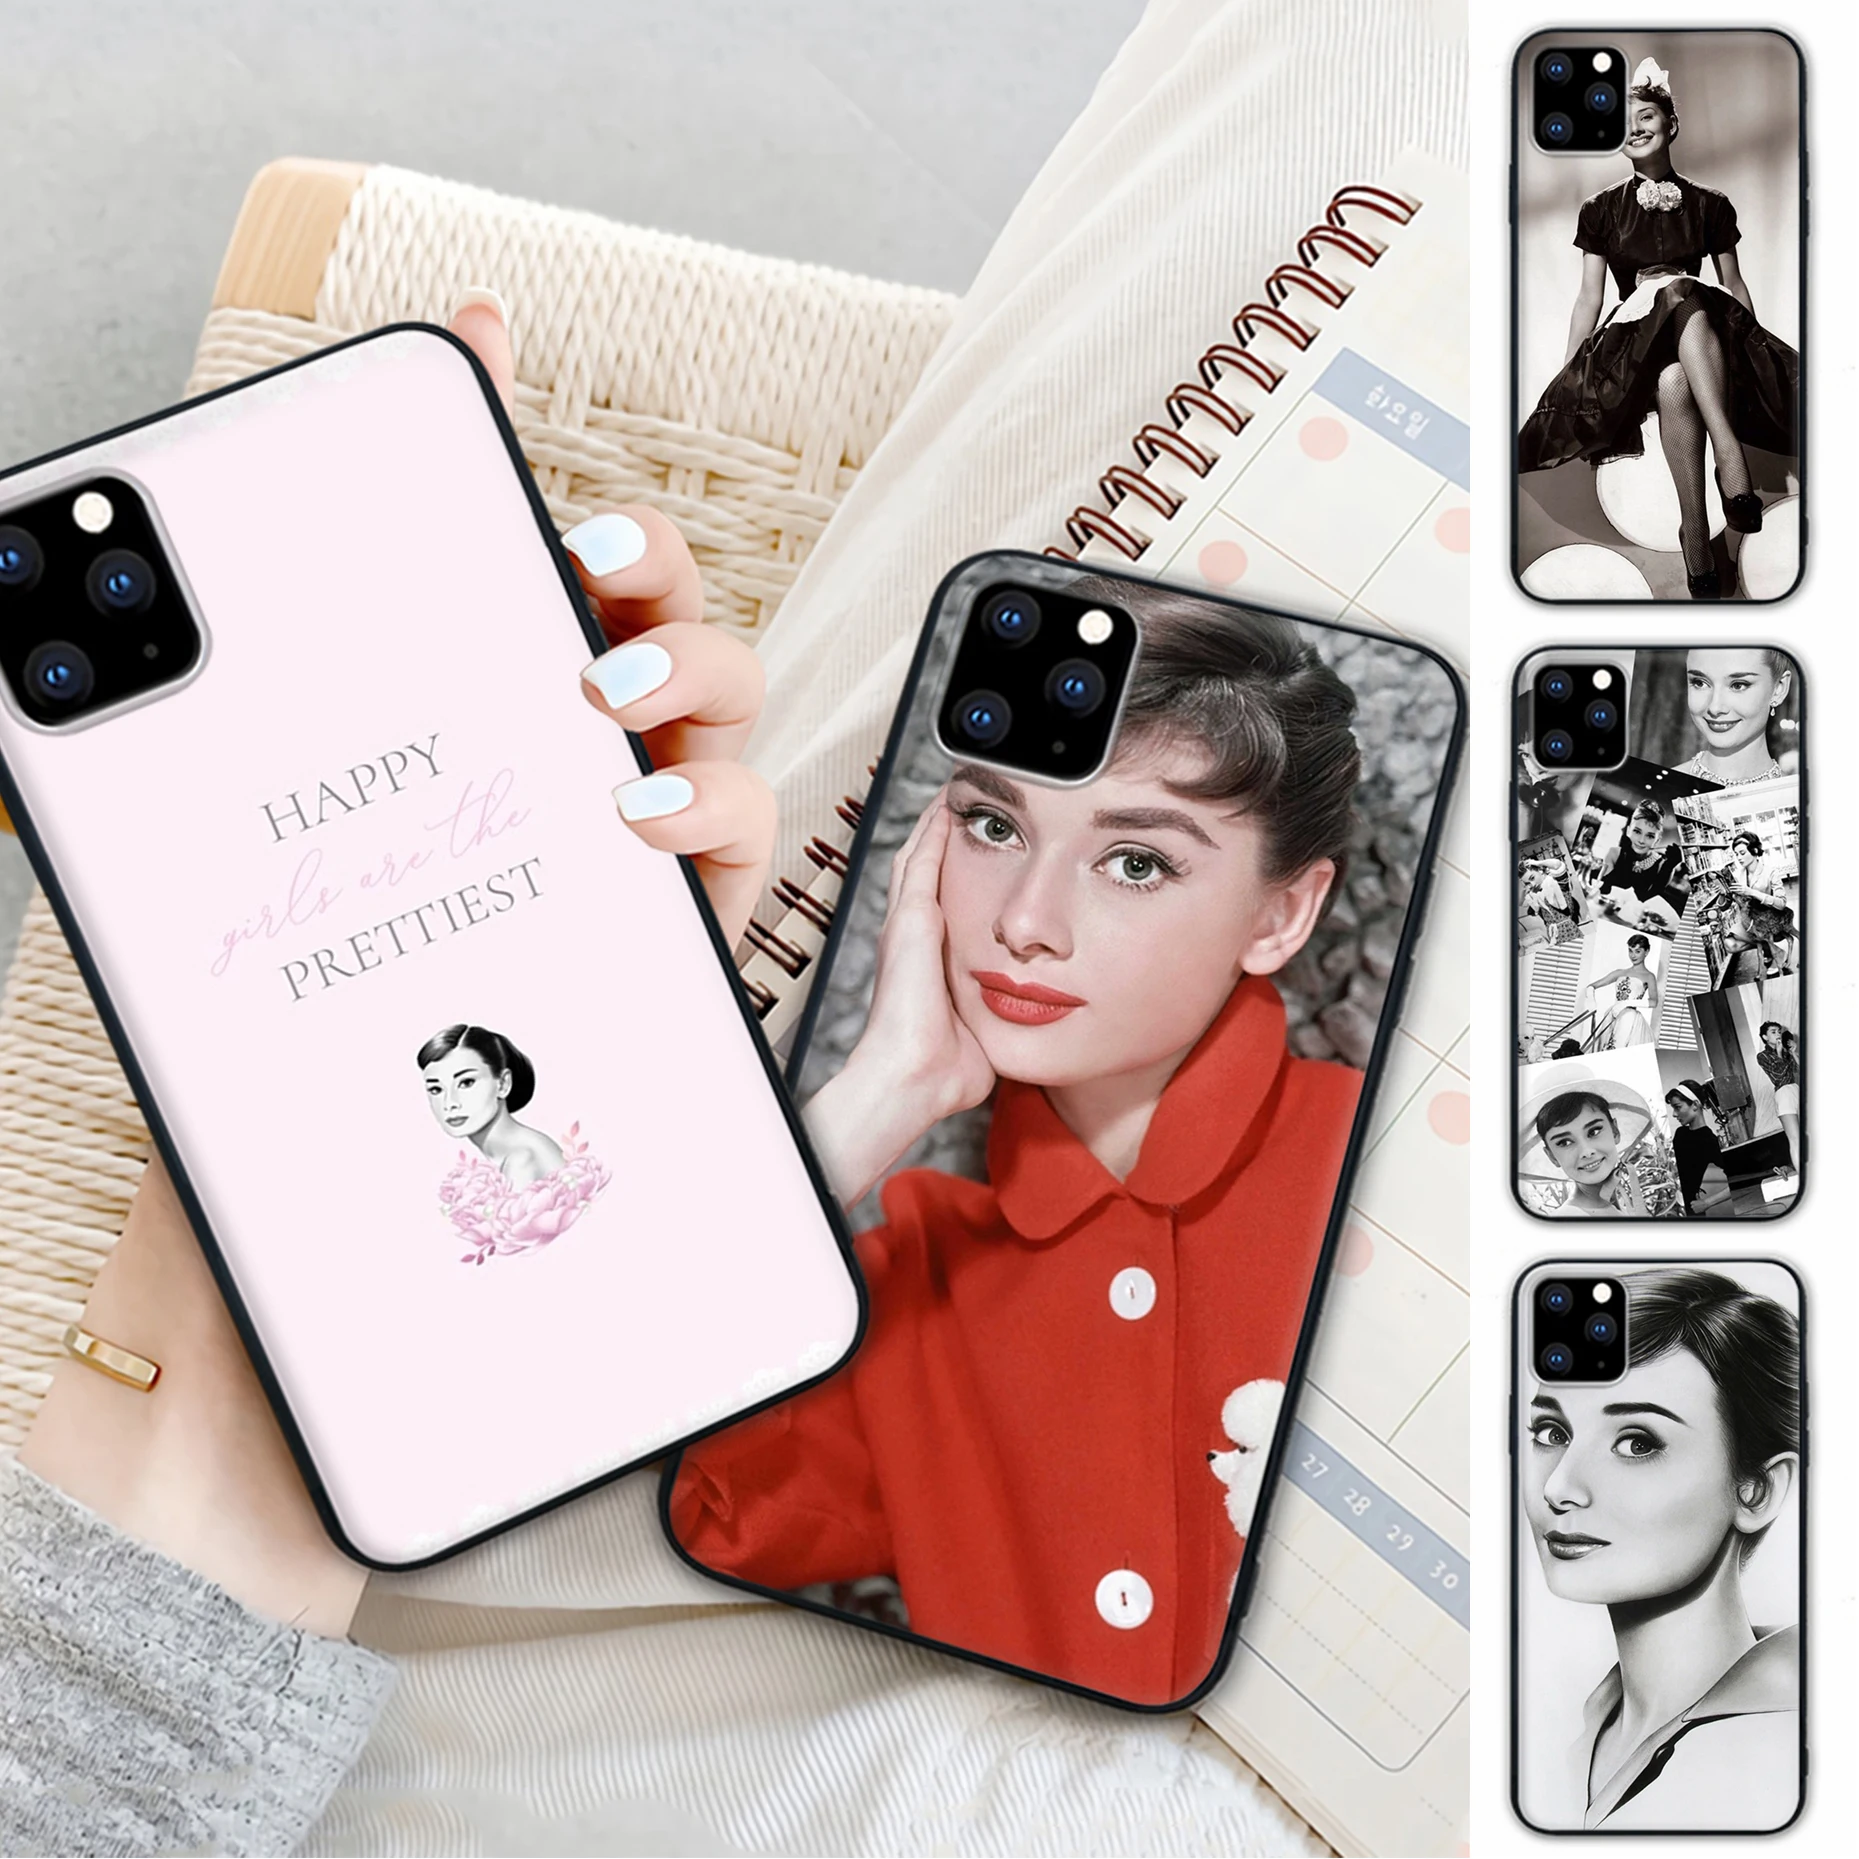 

New Products Audrey Hepburn Novelty Telephone Case For Samsung Galaxy M30S A01 A21 A31 A51 A71 A91 A10S A20S A30S A50S Cover